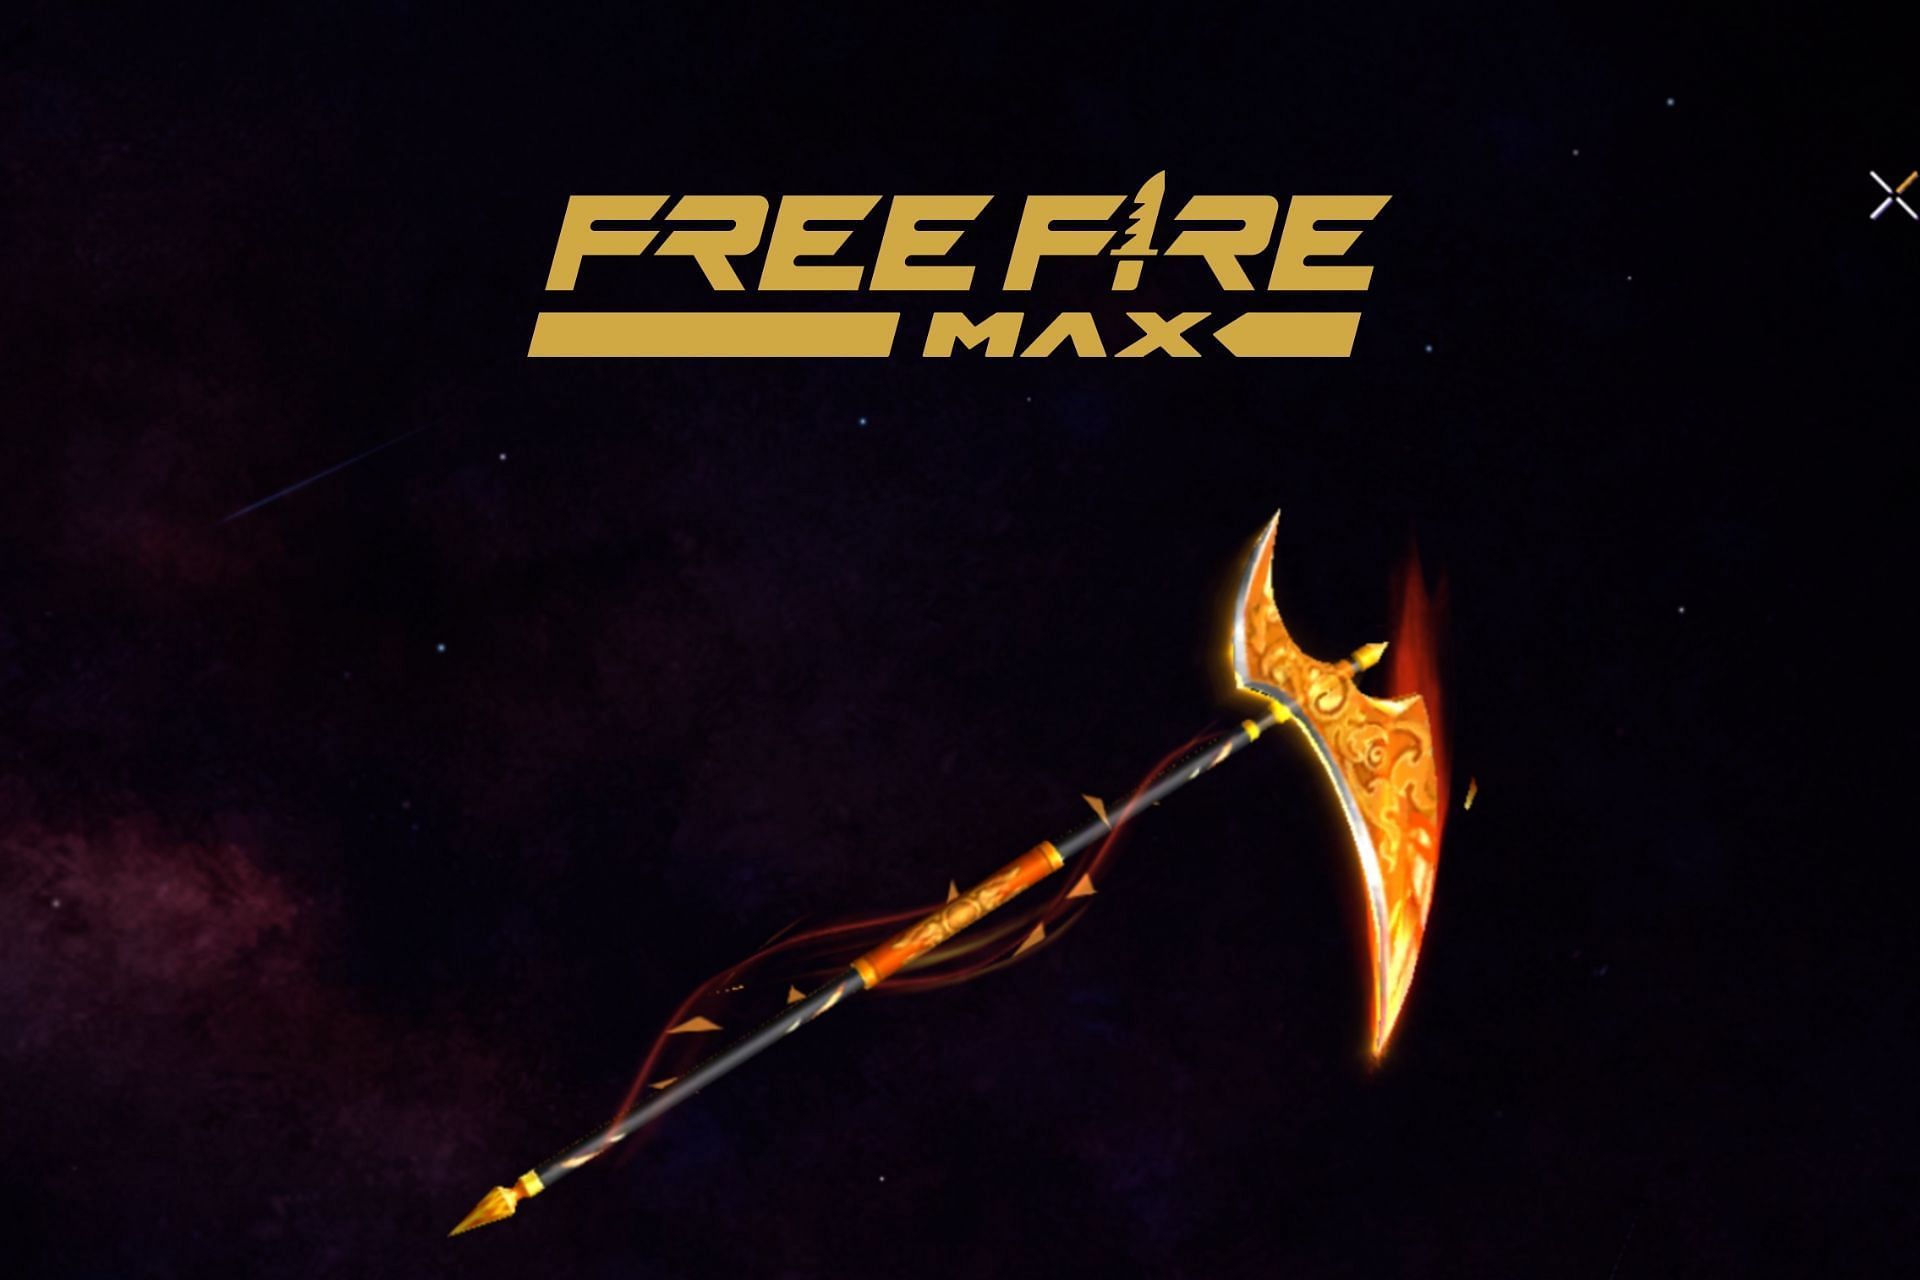 Get free Incandescent Tattoo and Scythe skin via Free Fire MAX